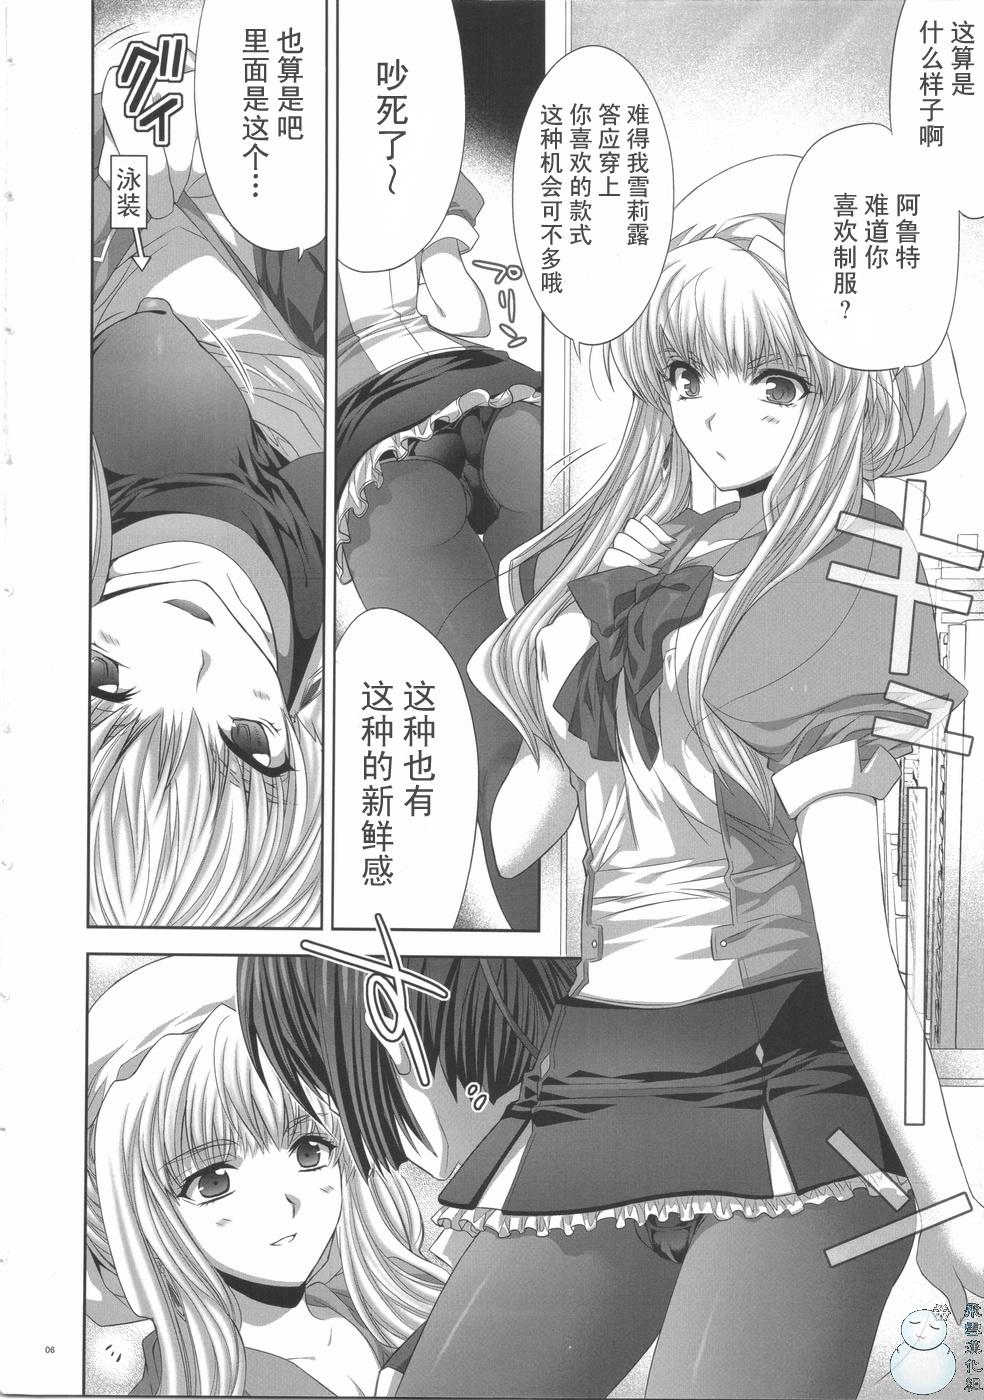 3some WITH WHOM DO YOU? - Macross frontier Italiana - Page 6